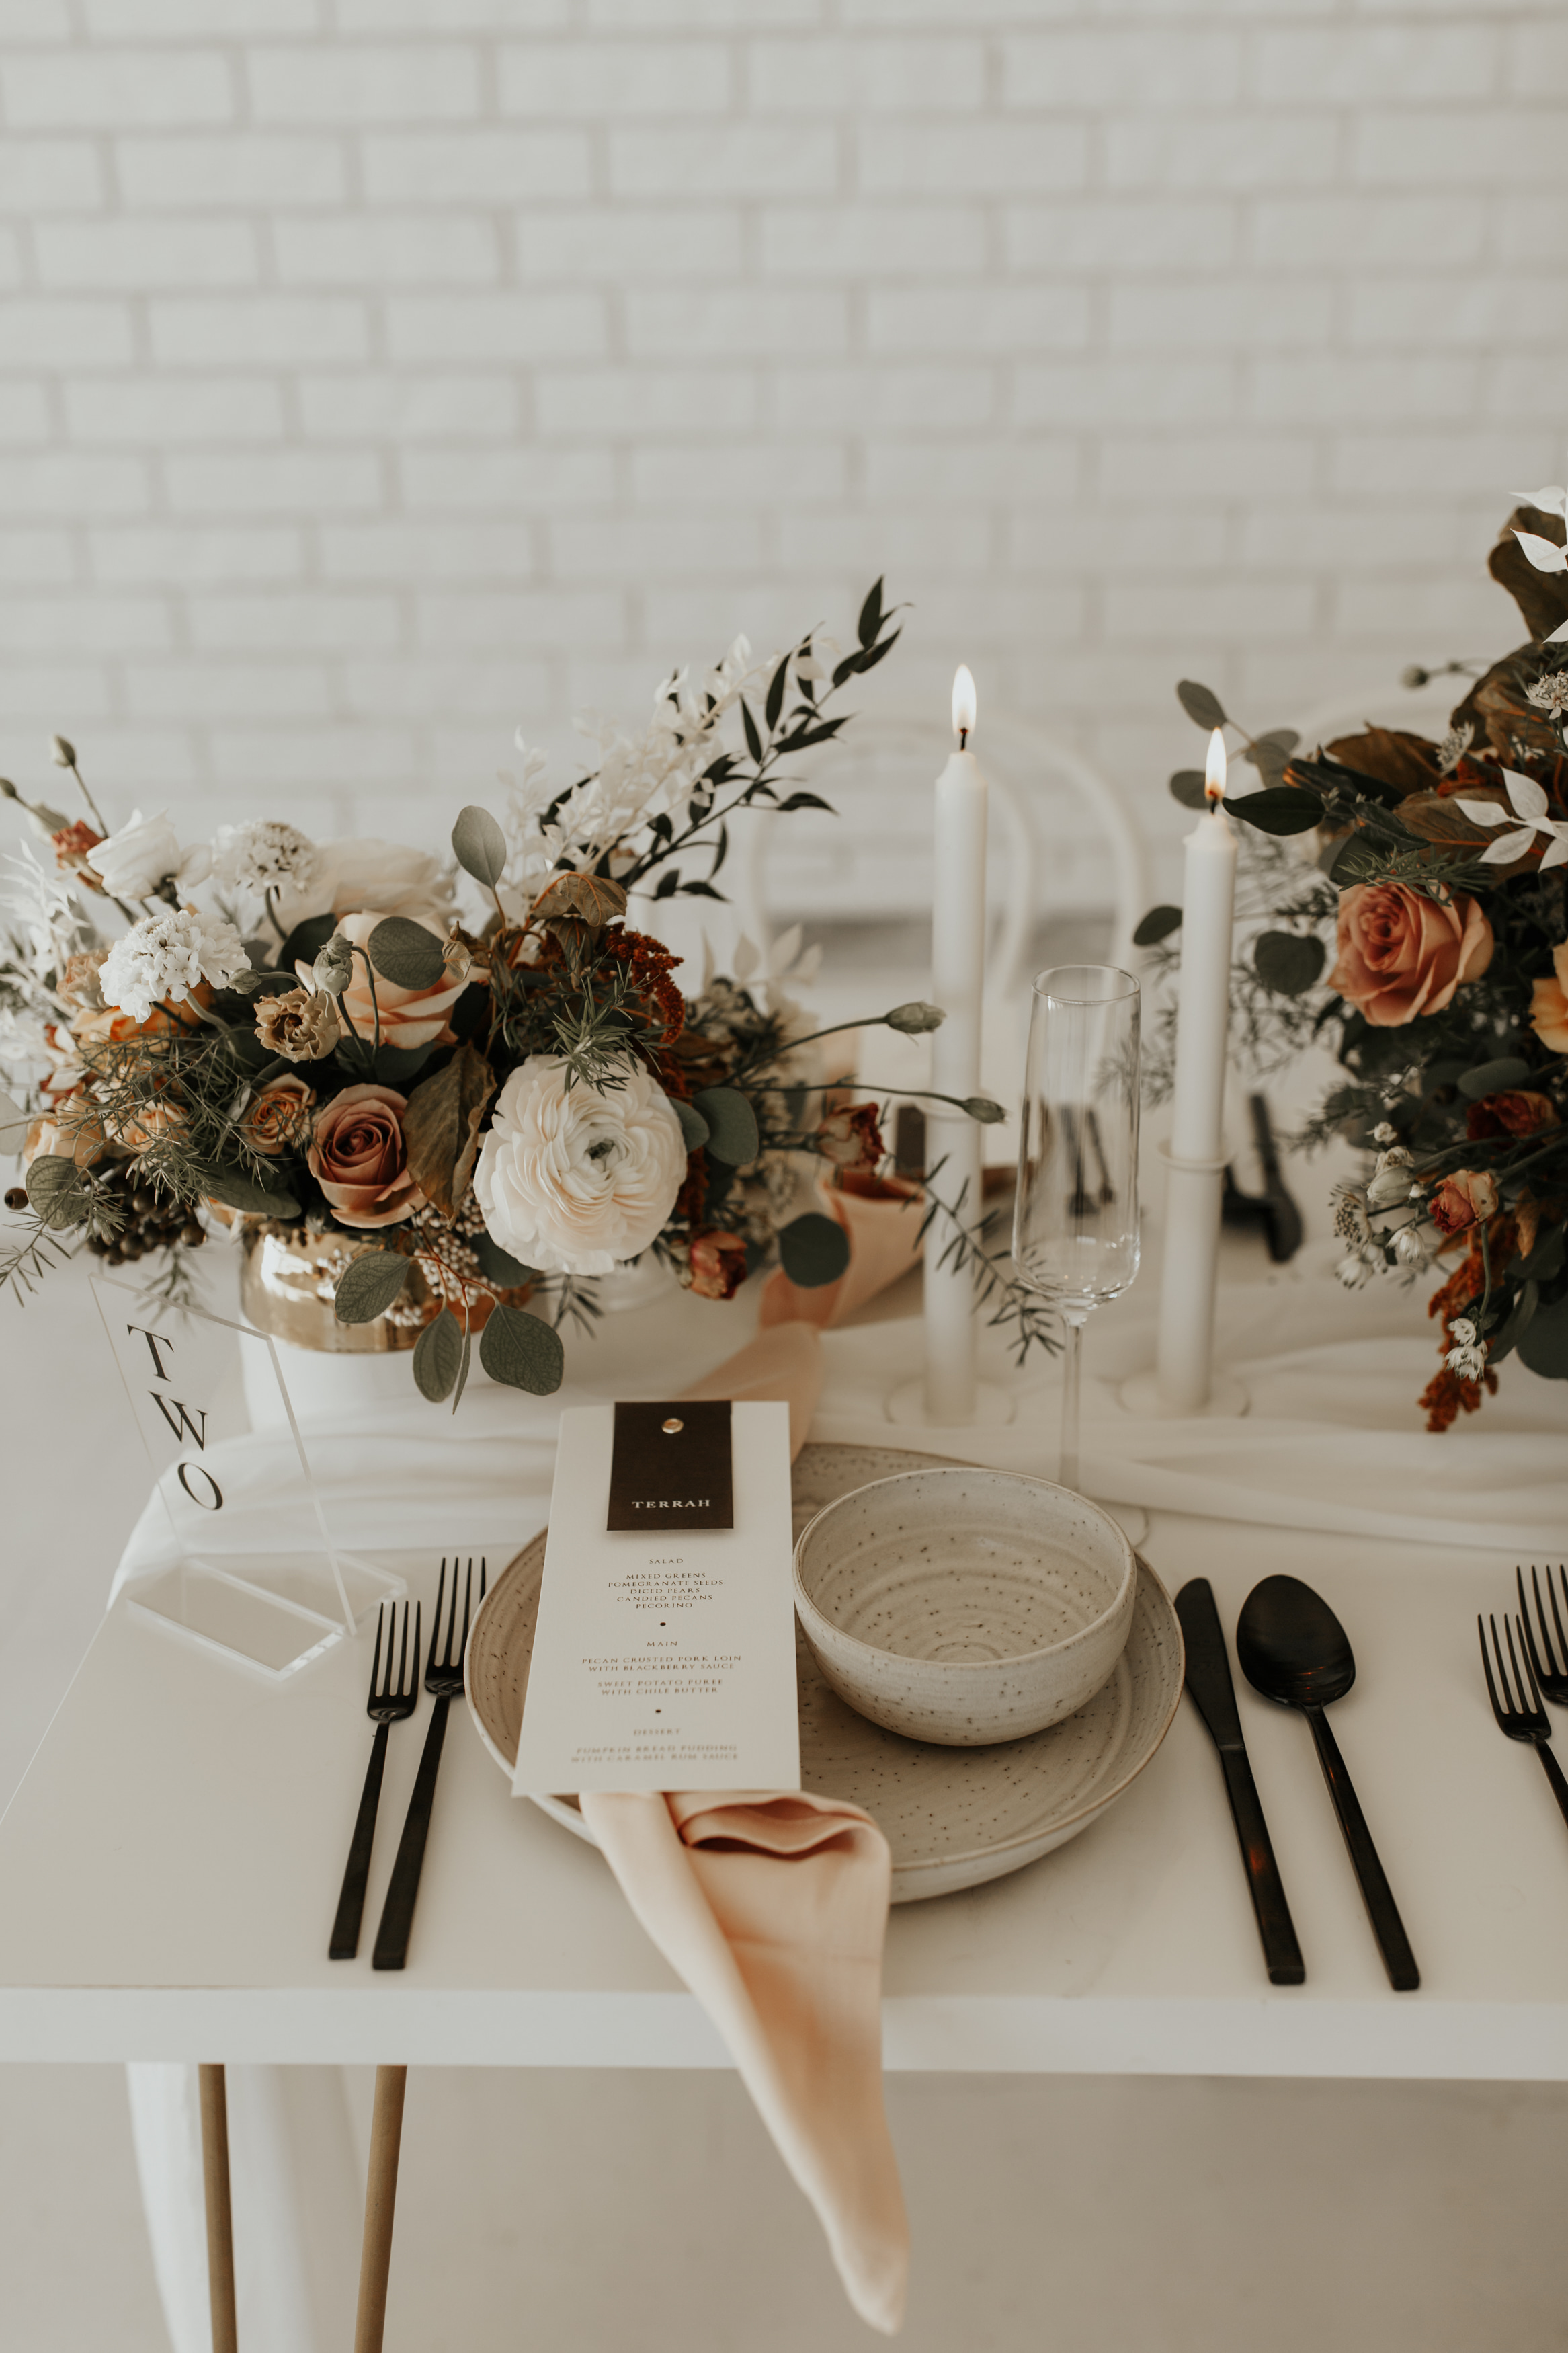 Flowers by The Shabby Rose - Modern styled shoot at The Emerson with Madeline Shea Photography and Alexa Kay Events | Dallas DFW Wedding Planner